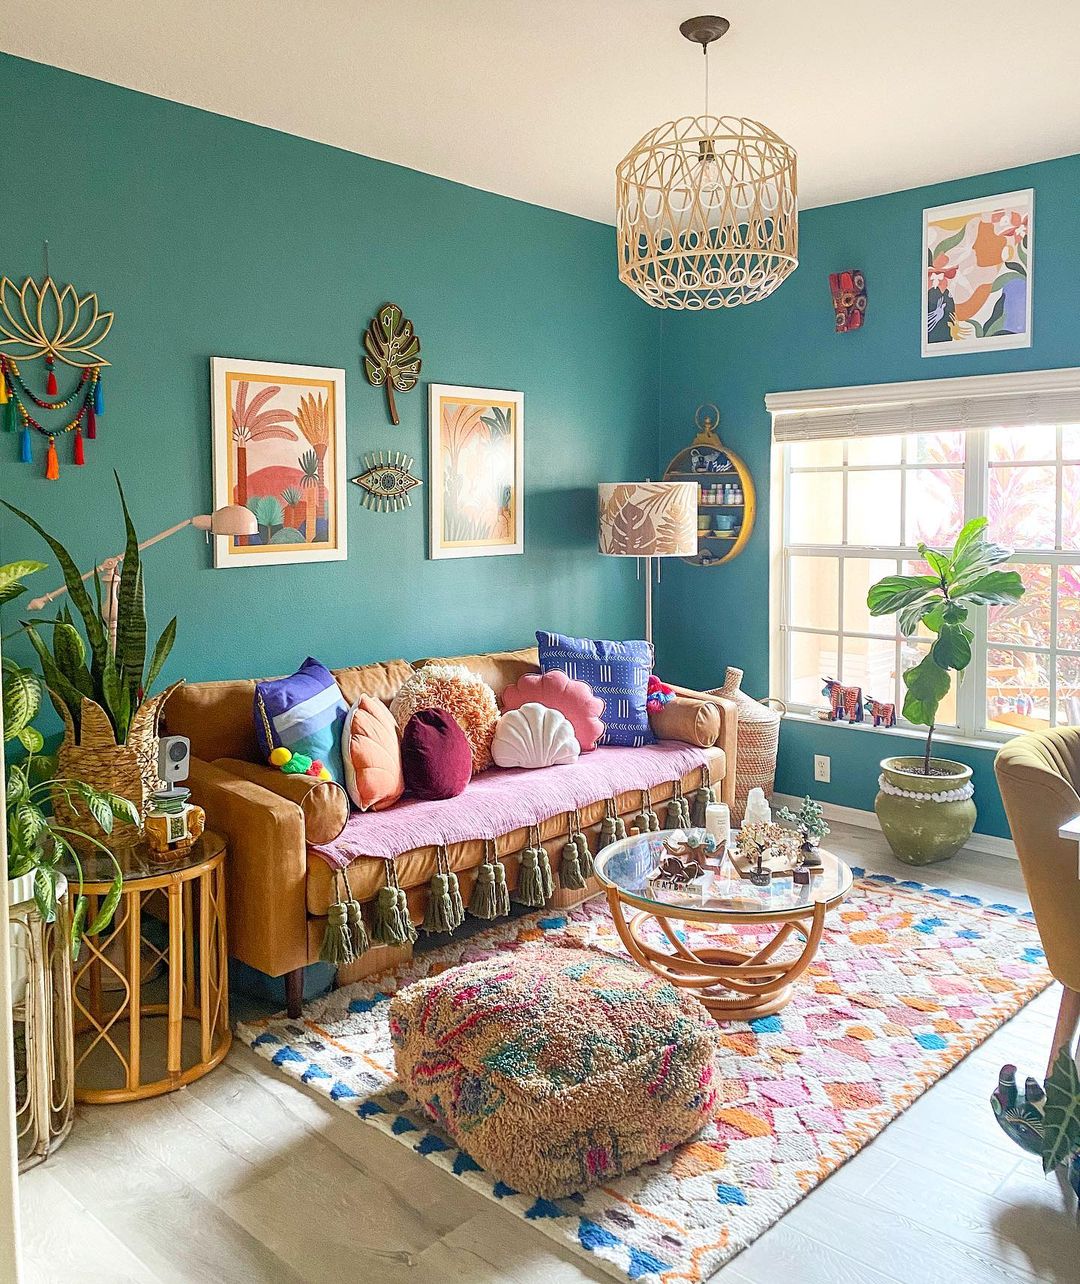 https://www.extraspace.com/blog/wp-content/uploads/2021/02/How-to-Decorate-in-Bohemian-Style-Use-a-Jewel-Toned-Color-Palette.jpg